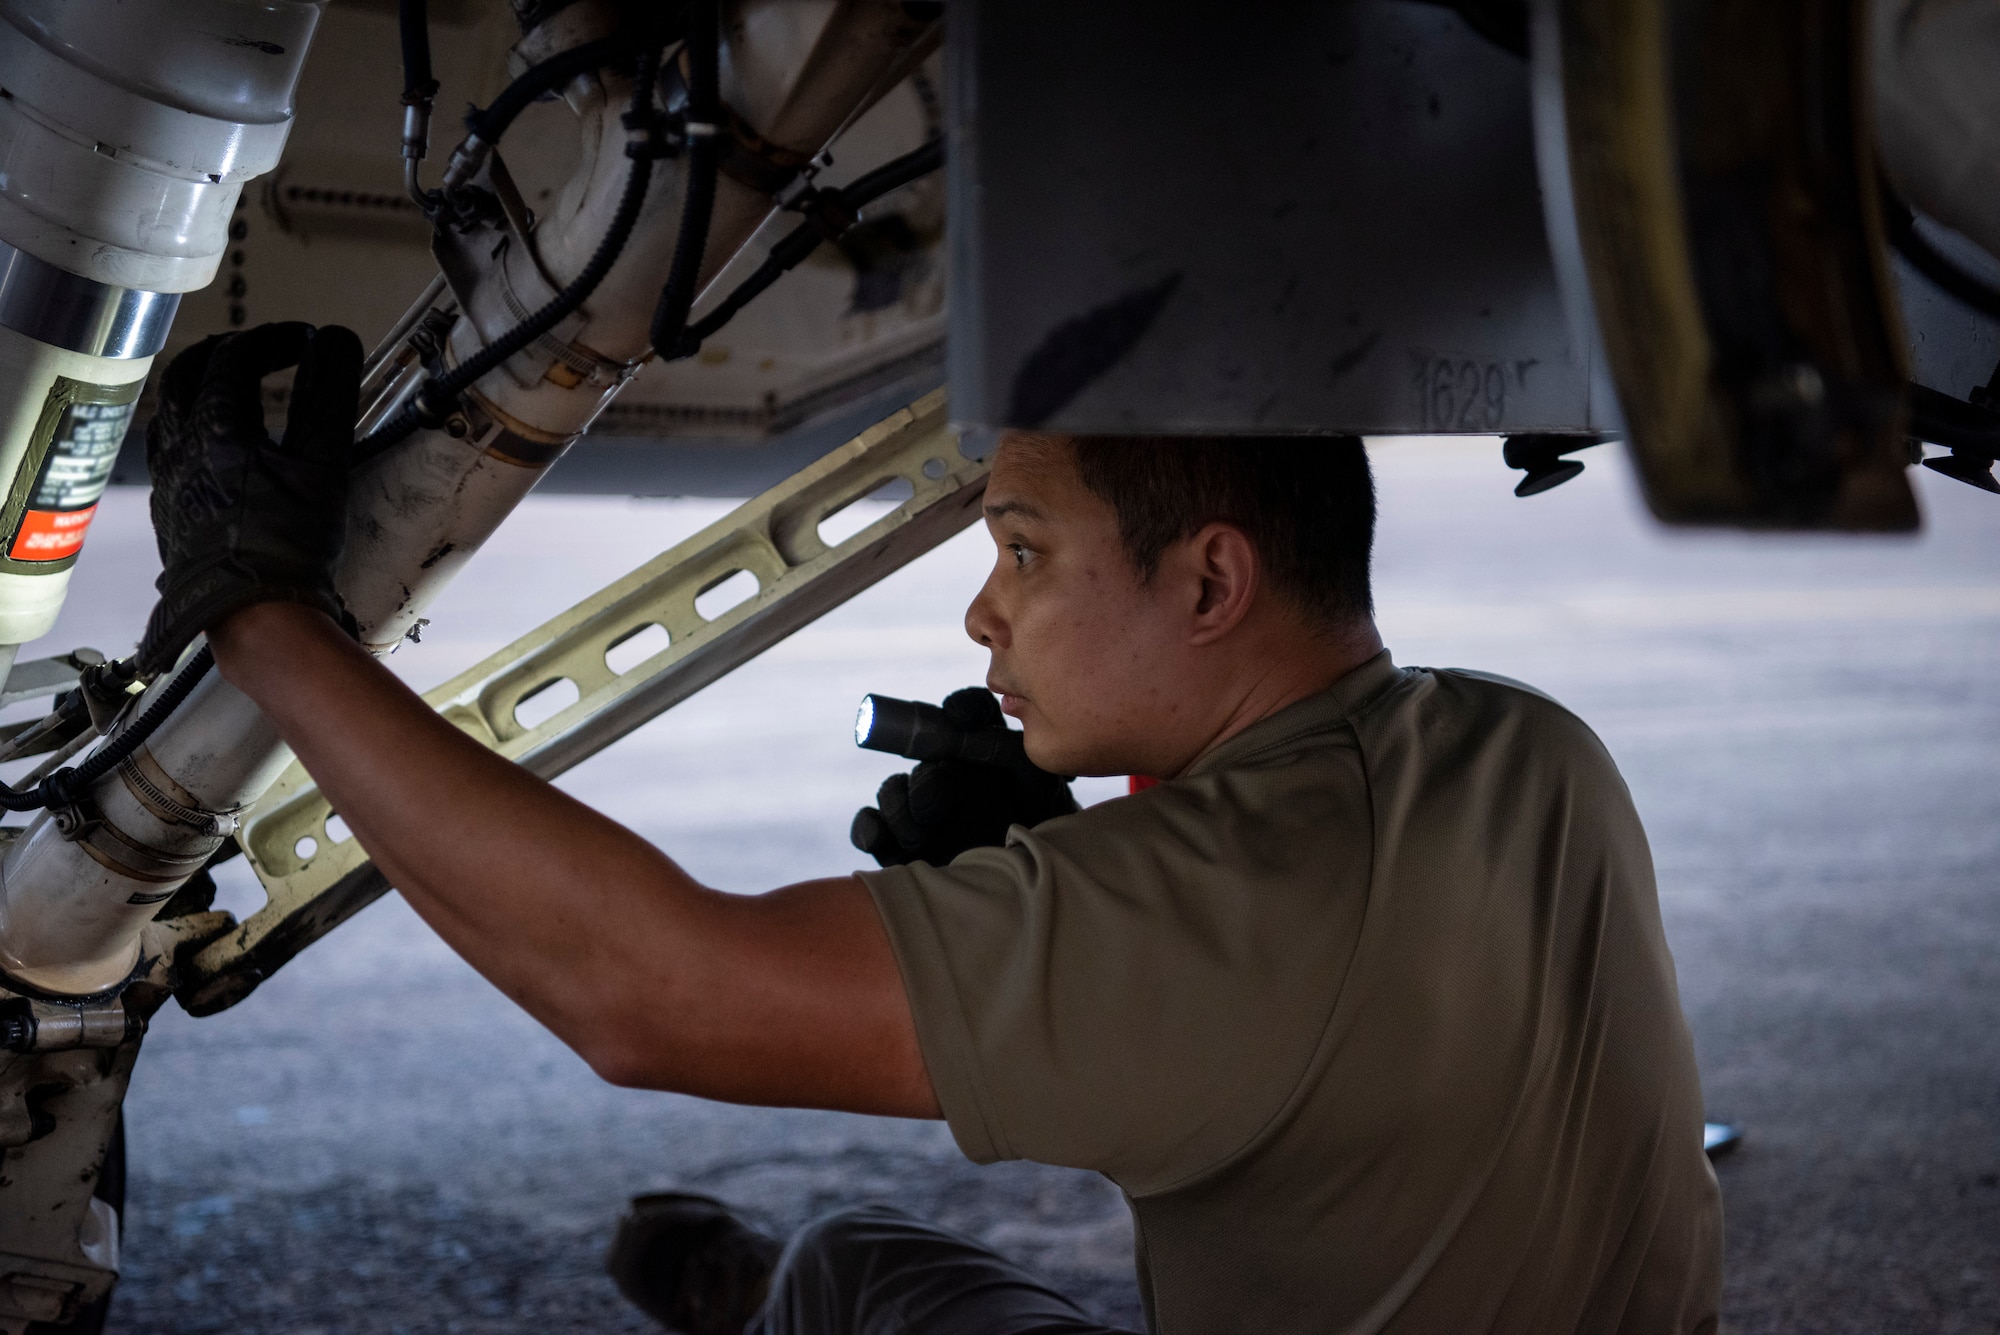 Crew chief performs maintenance on an aircraft